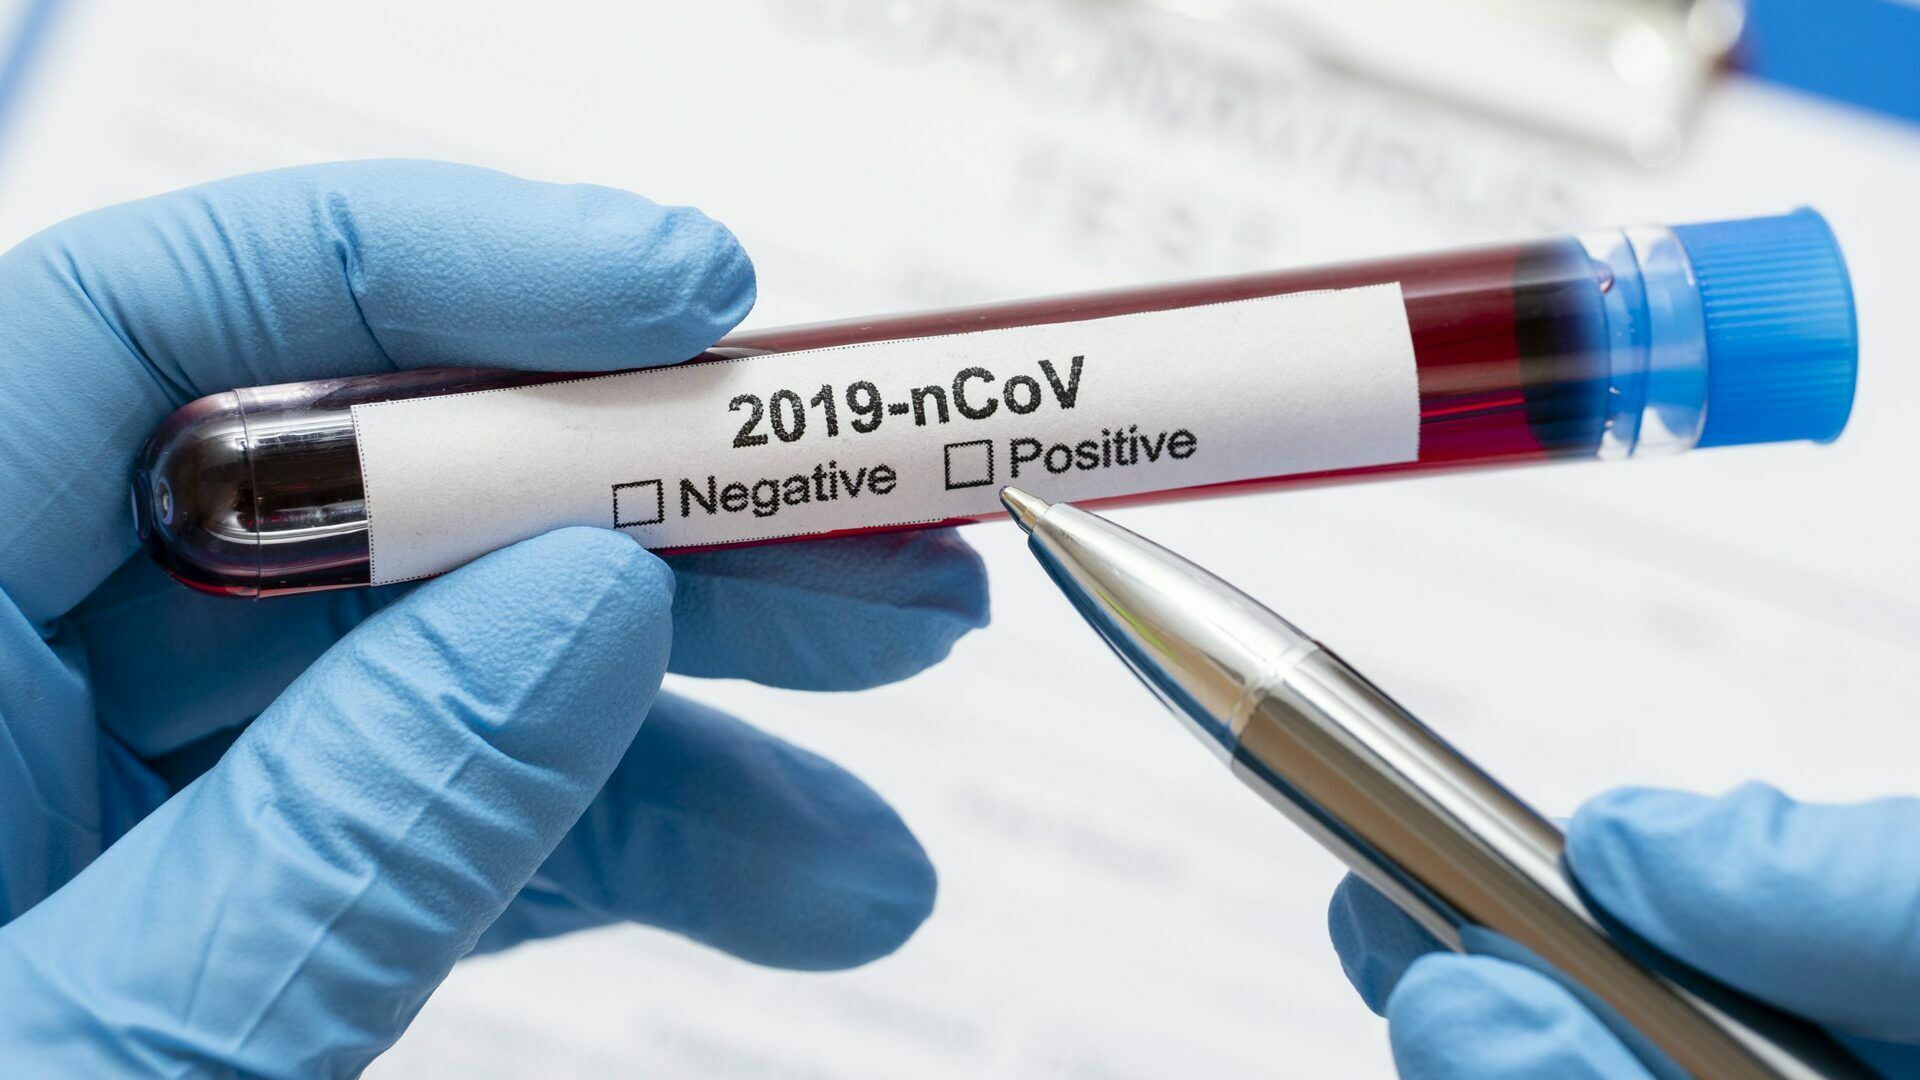 "Invitro": tests for coronavirus can now be implemented by yourself and without leaving home